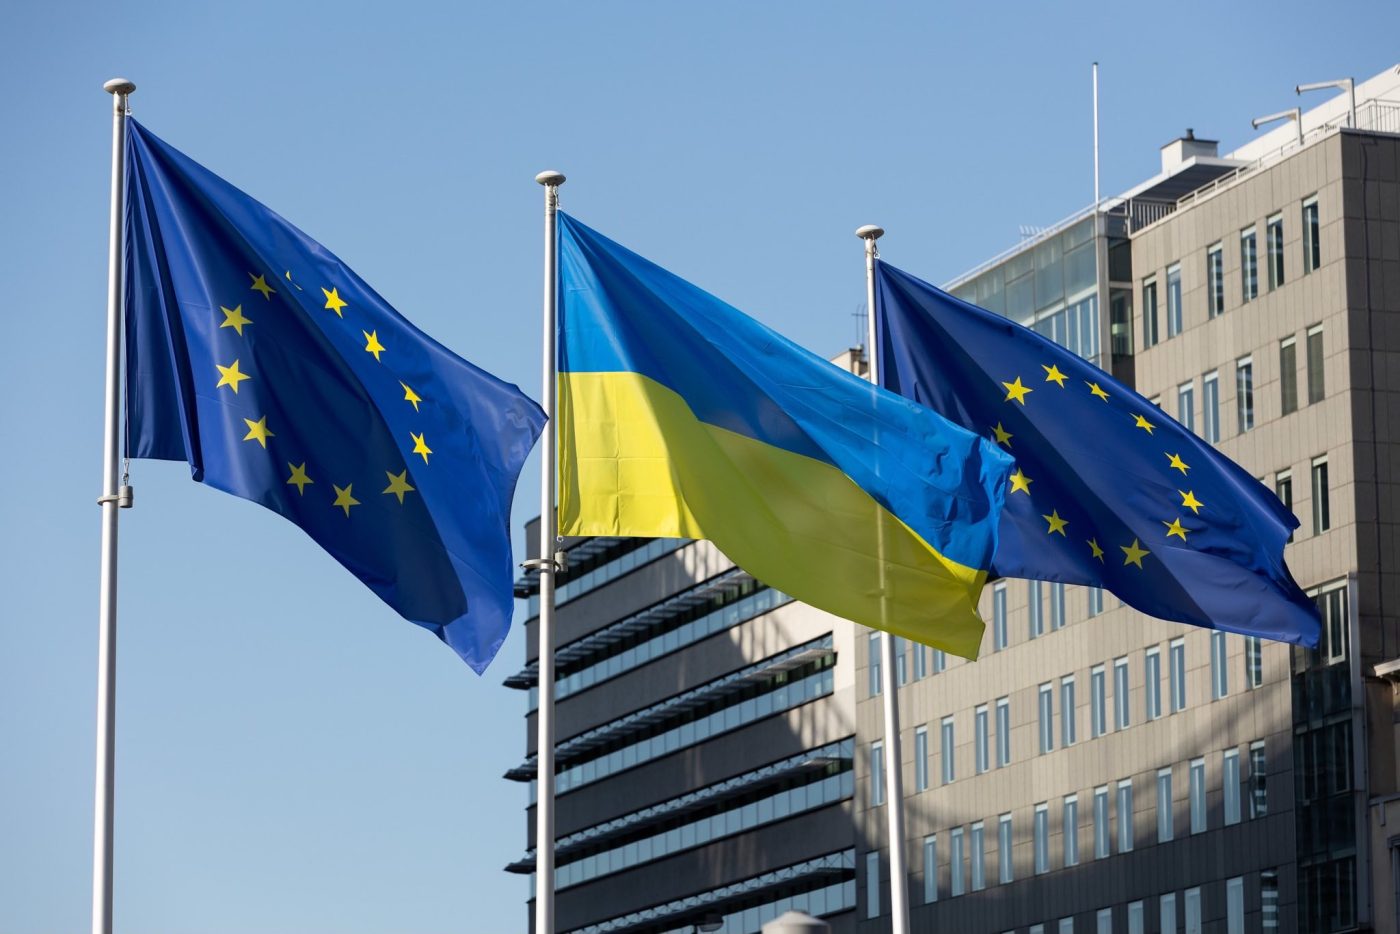 Photo: Ukraine and EU flags. t marks 32 years of independence of Ukraine and embodies the EU's unflinching support to this brave nation. Credit: @EU_Commission via Twitter https://twitter.com/EU_Commission/status/1694624251628638300/photo/2